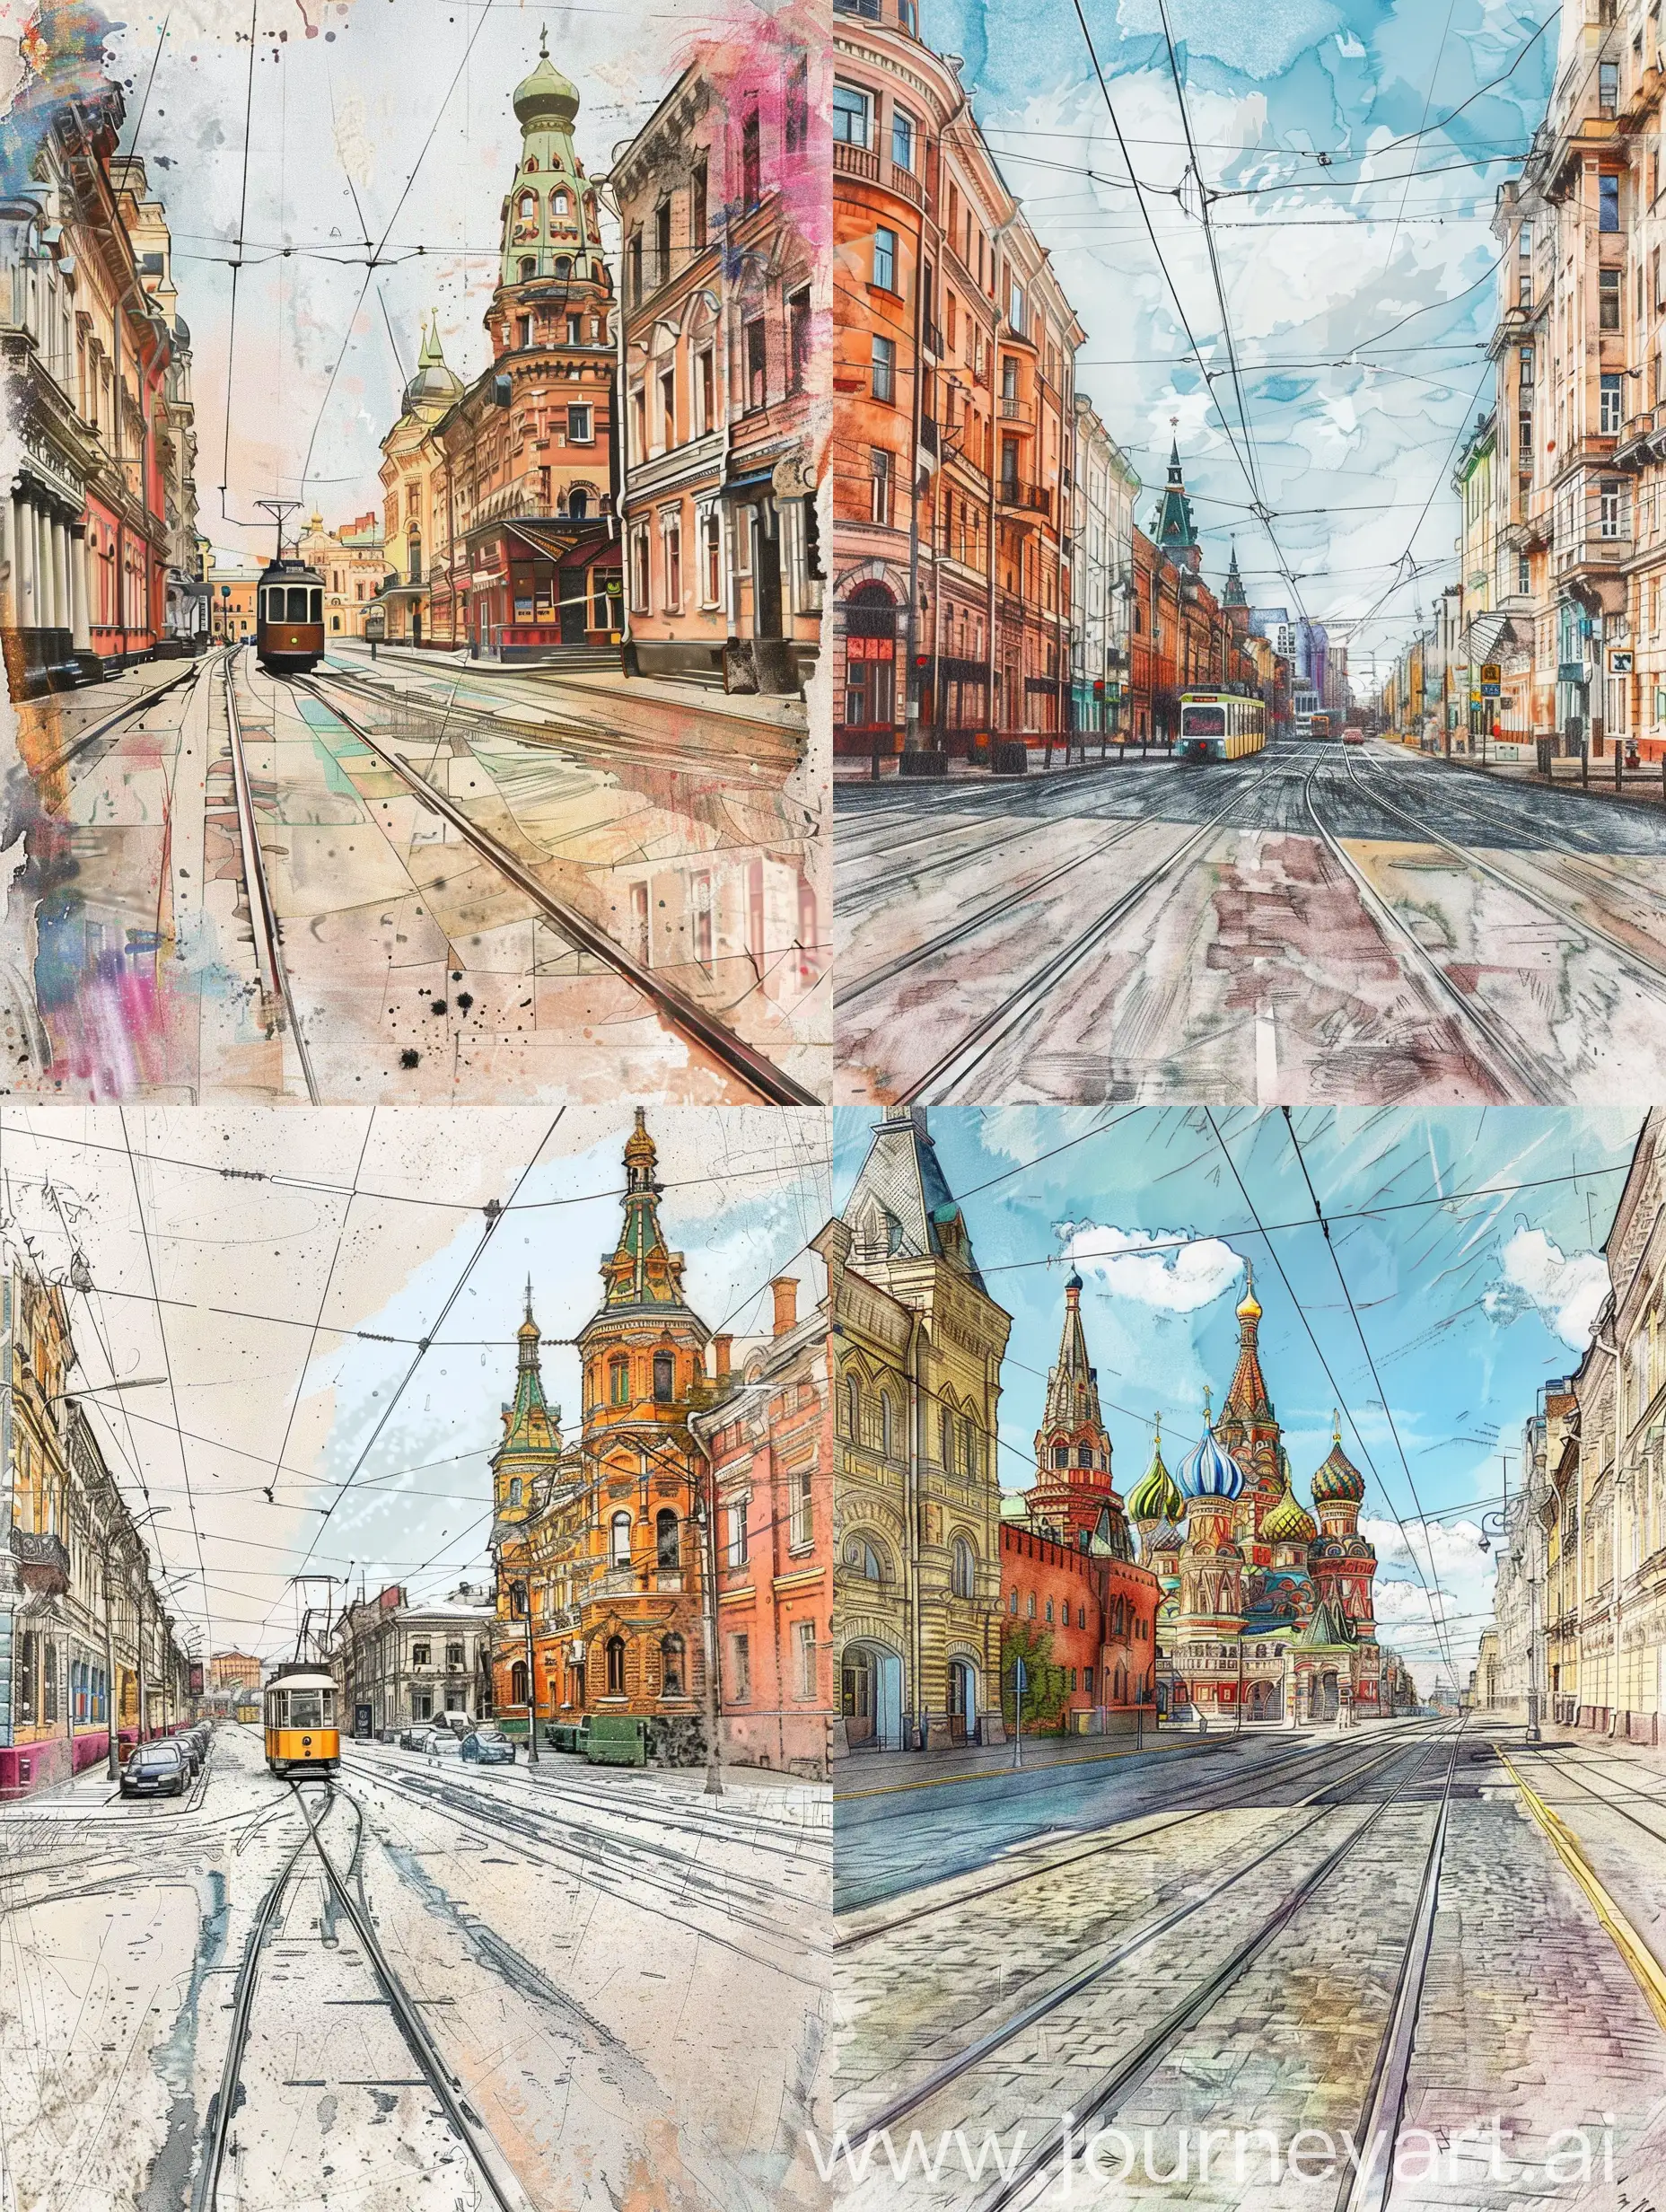 draw a photo of a Russian city street with tram tracks and buildings in the style of constructivism, Rococo and Artdeco